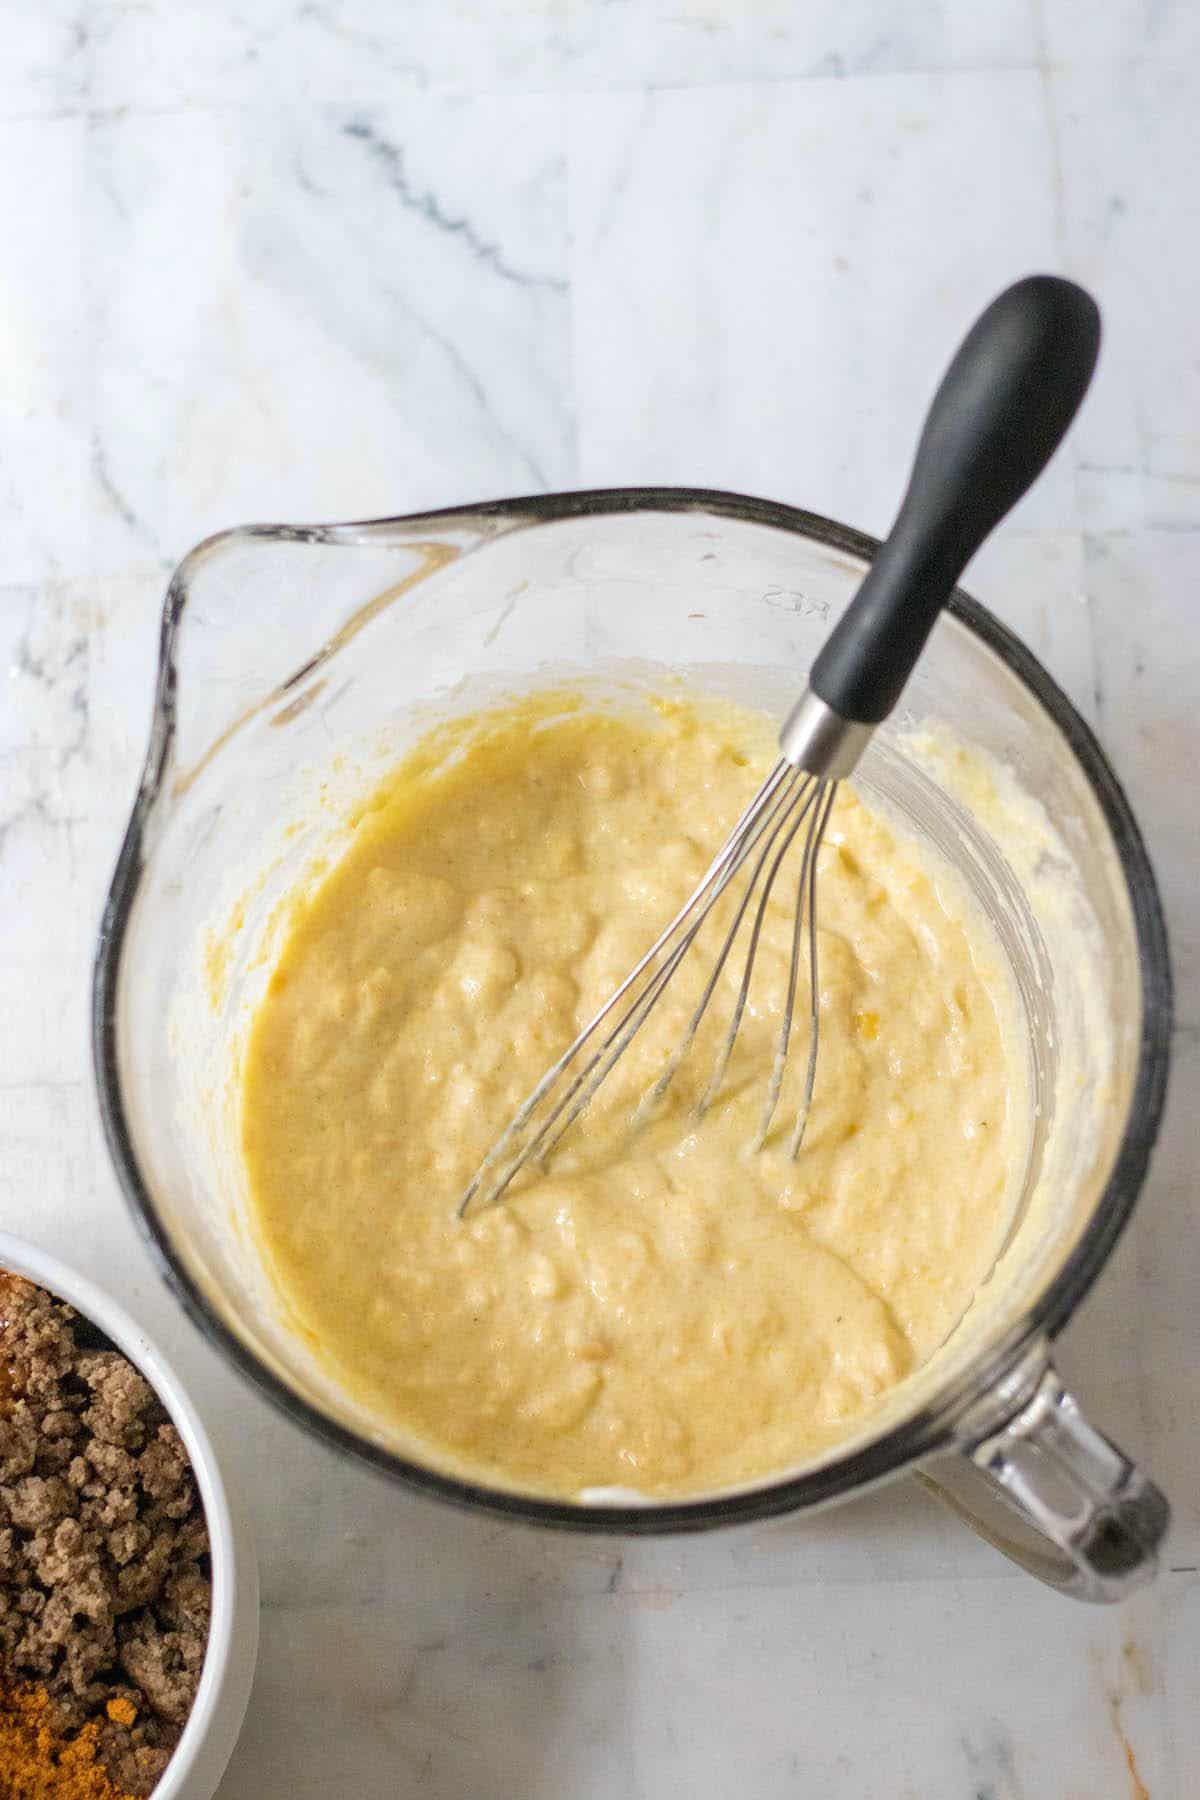 A combined mixture of cornbread mix, creamed corn, sour cream and egg in a mixing bowl.